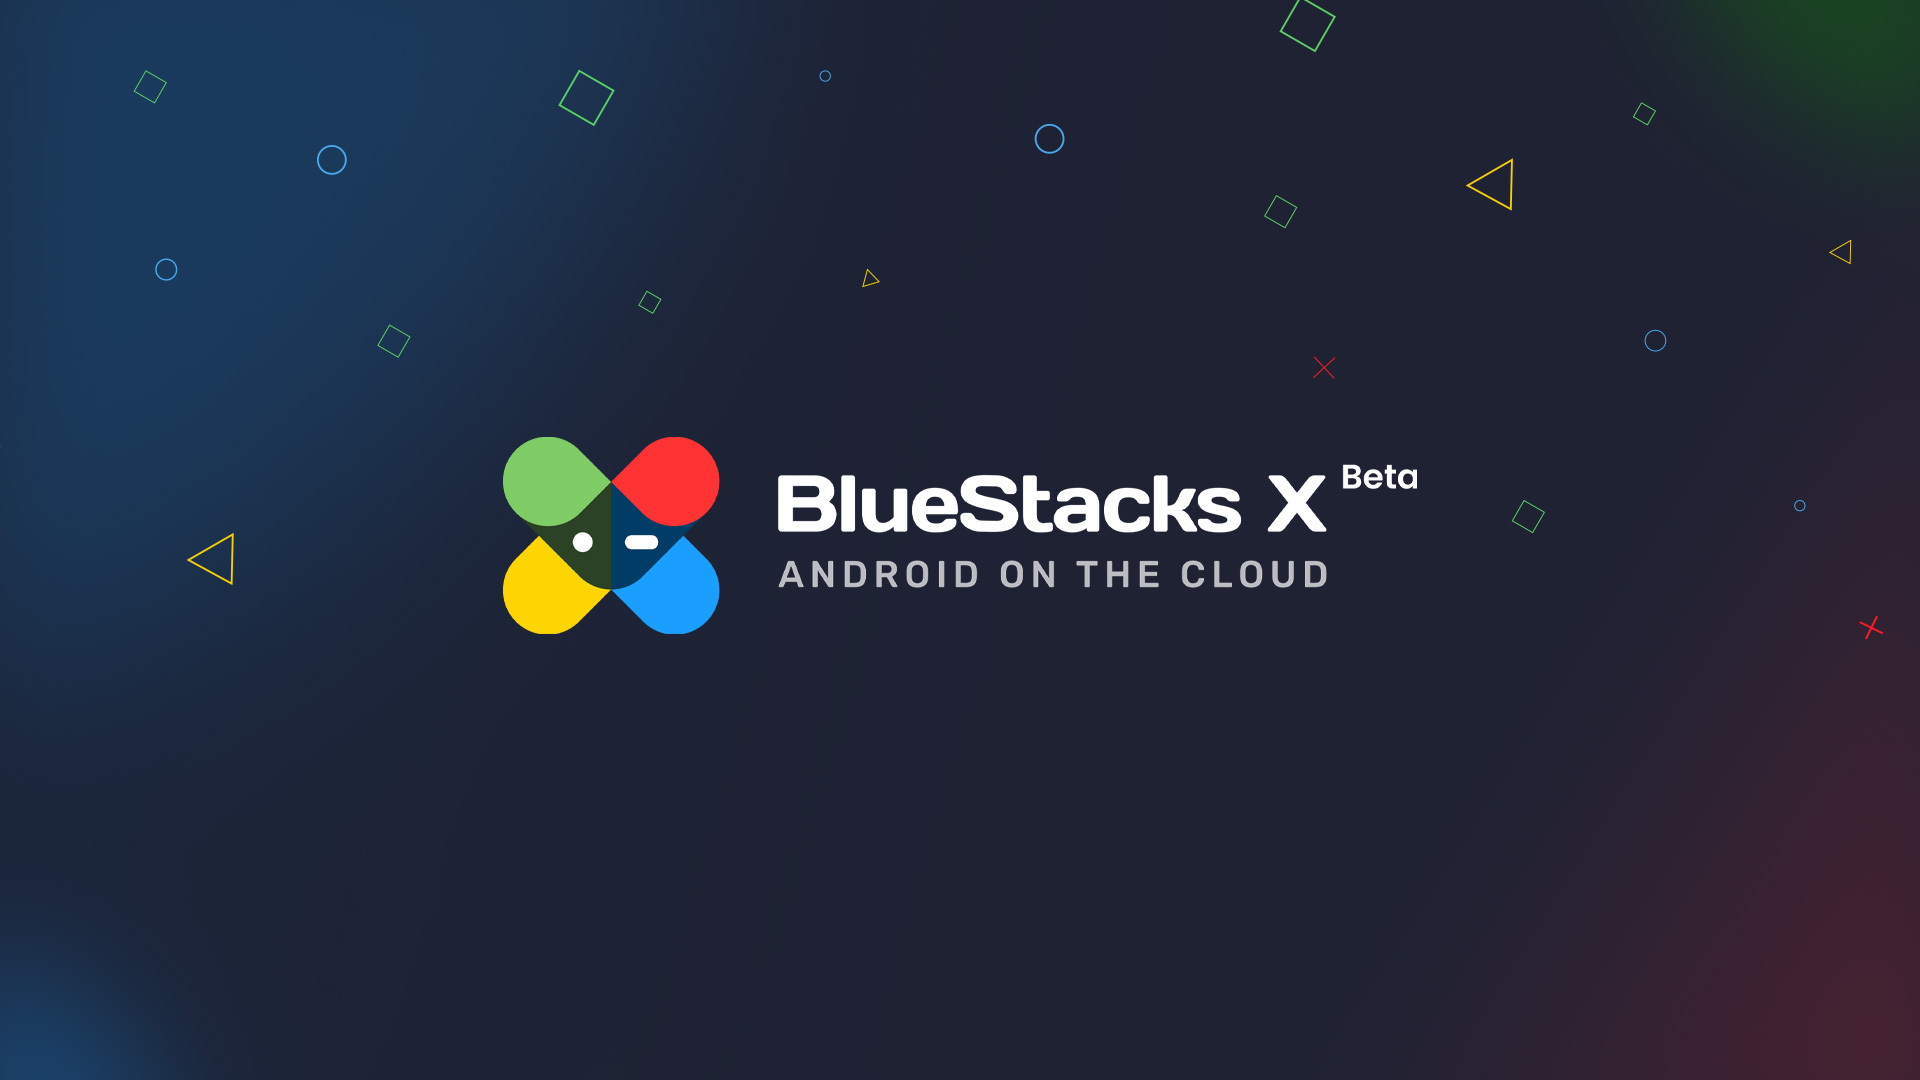 Run Android apps on Mac OS X with Bluestacks